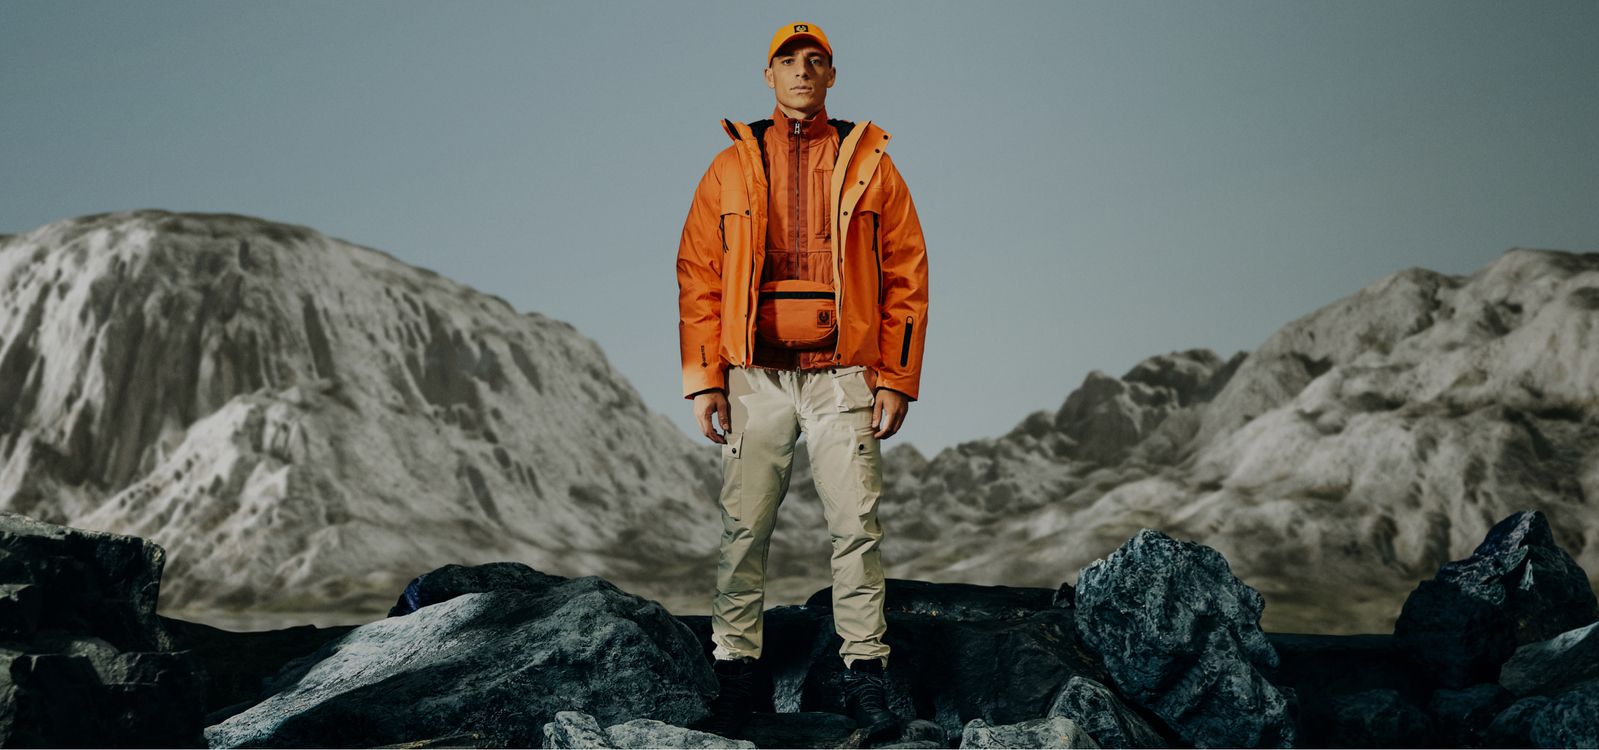 Male model is wearing the Astral Jacket in Signal Orange, the Sector Overshirt in Amber and the Trialmaster Cargos in Fawn.